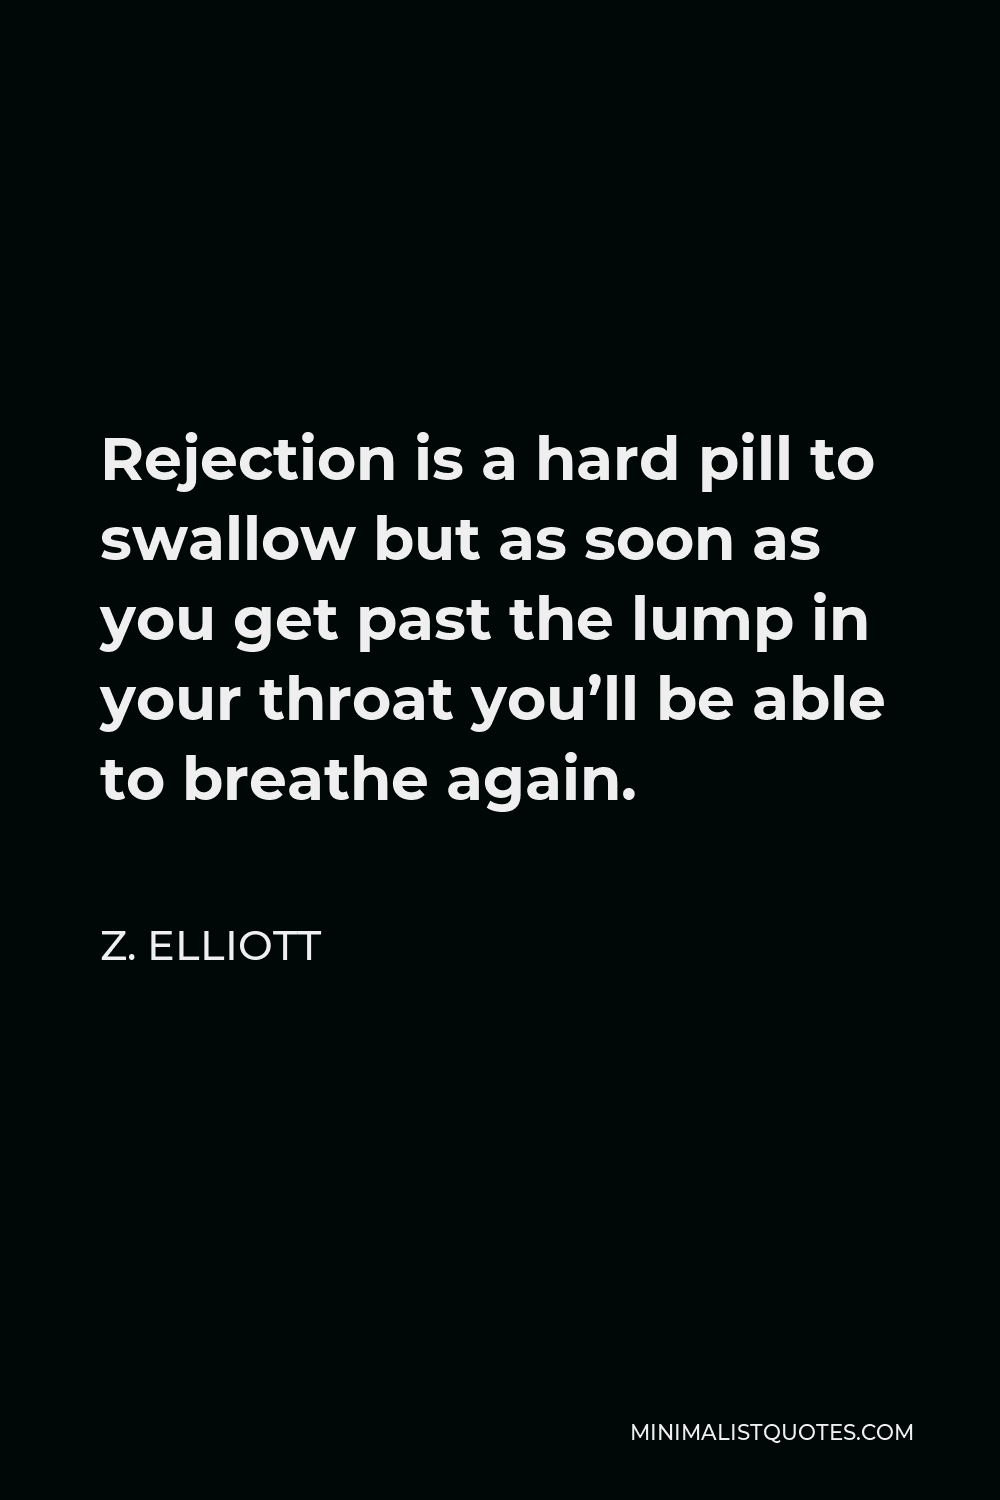 Z. Elliott Quote - Rejection is a hard pill to swallow but as soon as you get past the lump in your throat you’ll be able to breathe again.